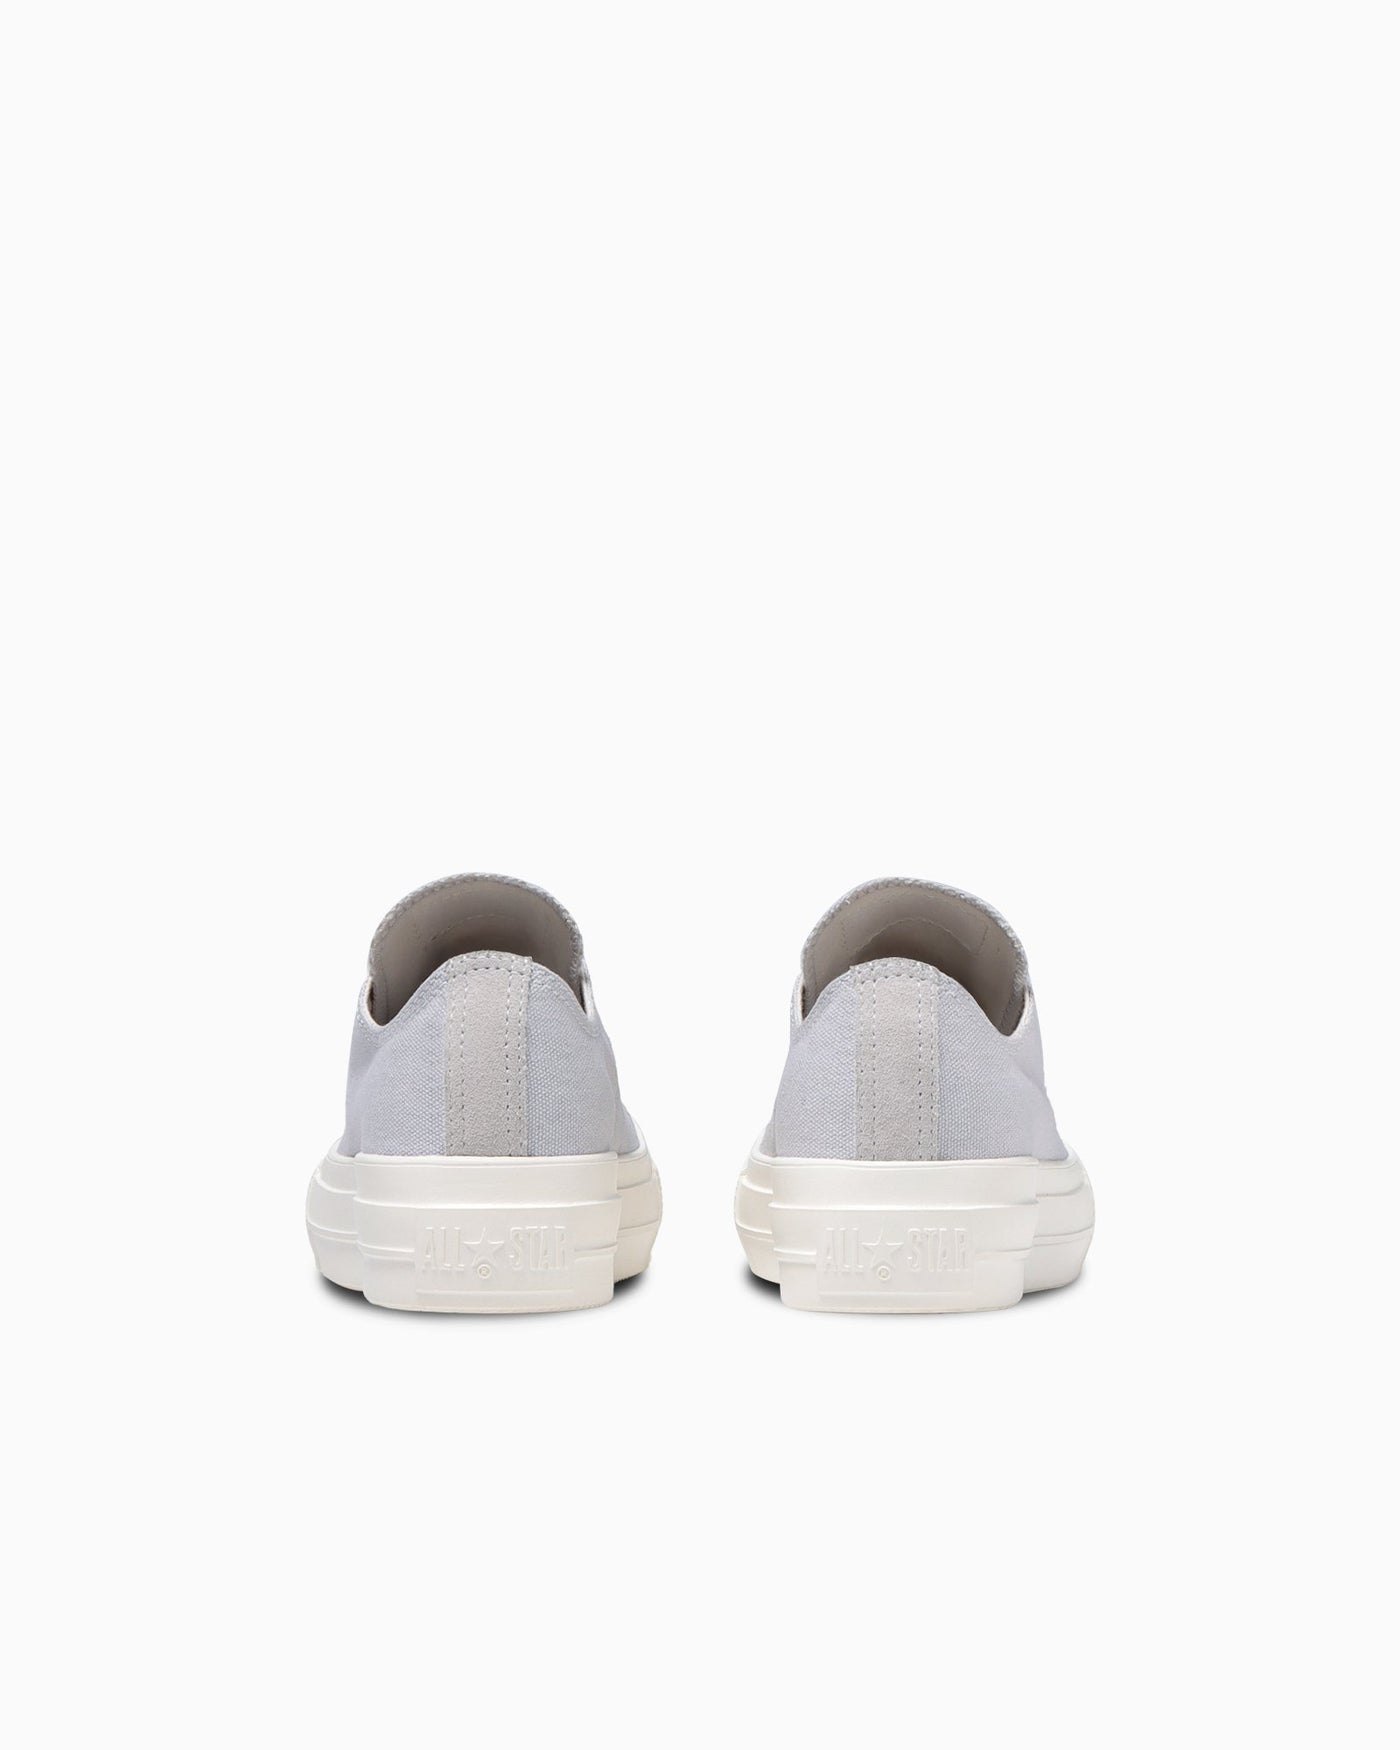 ALL STAR LIGHT PLTS POINTSUEDE OX